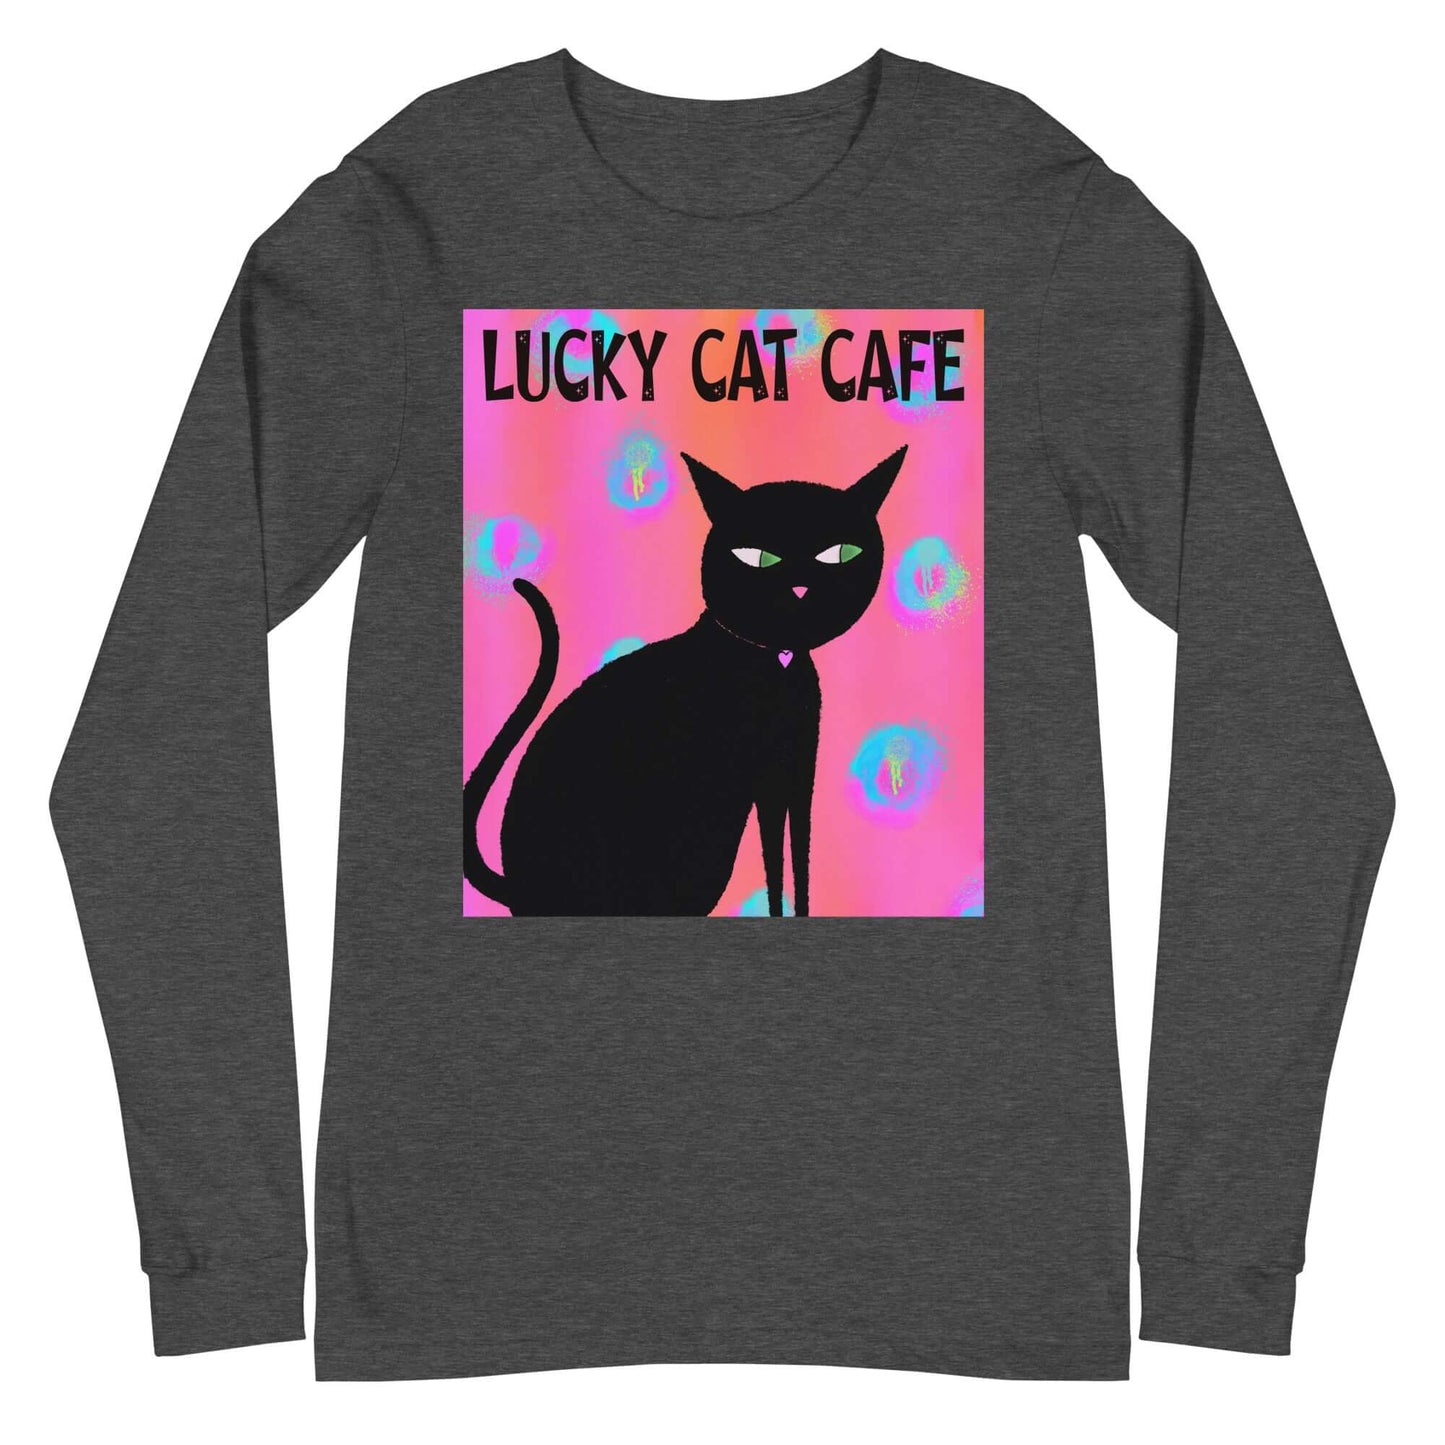 Black Cat on Hot Pink Tie Dye Background with Text “Lucky Cat Cafe” Unisex Long Sleeve Tee in Dark Gray Heather